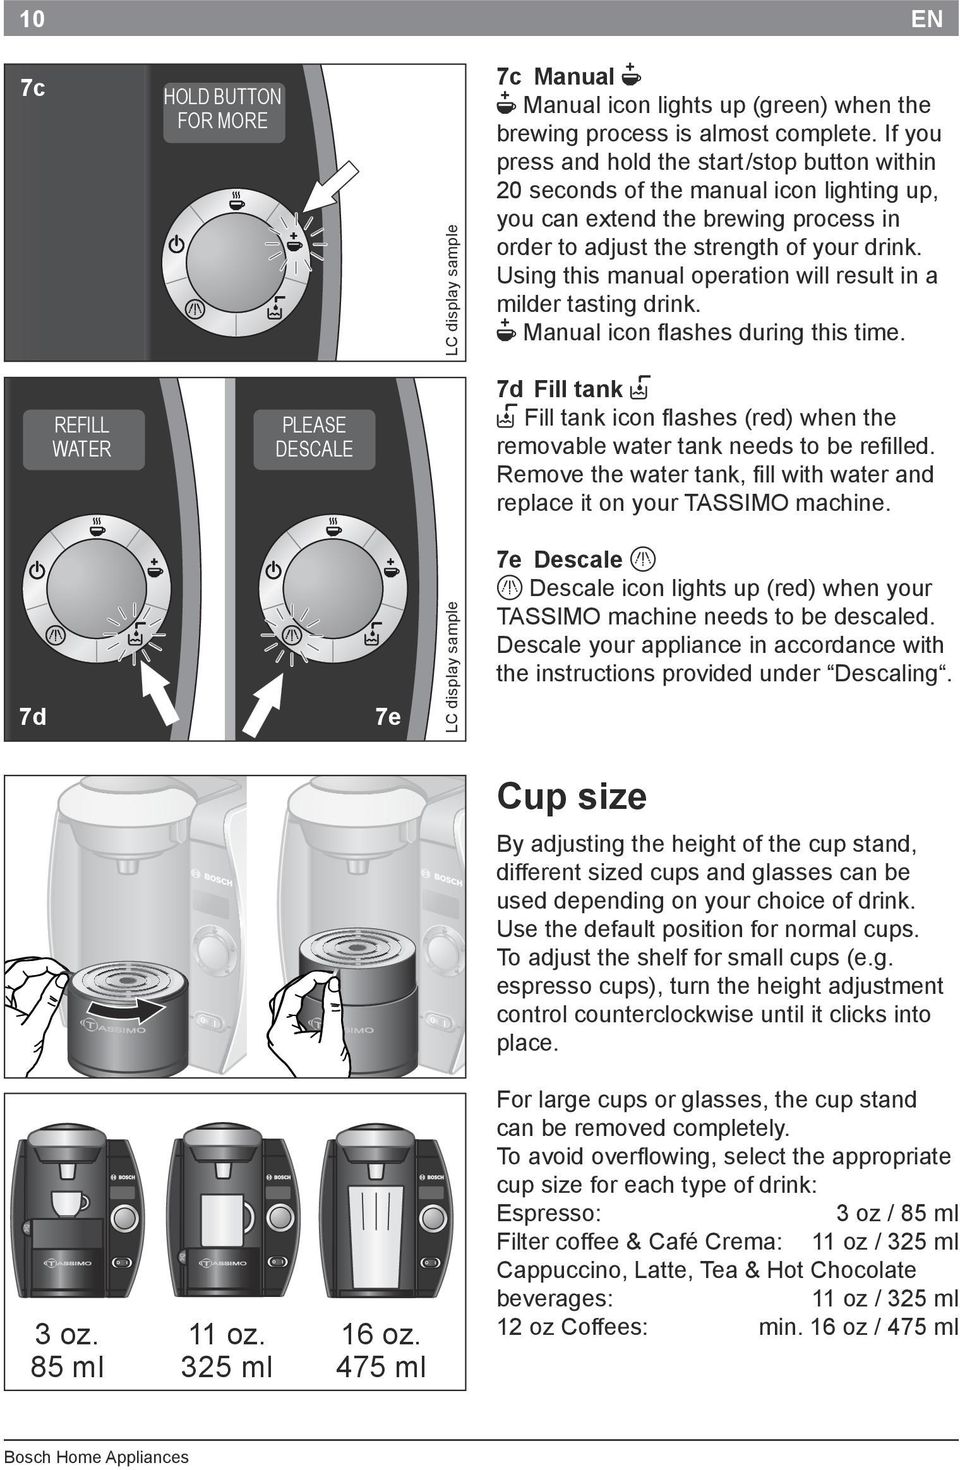 Using this manual operation will result in a milder tasting drink. N Manual icon flashes during this time.